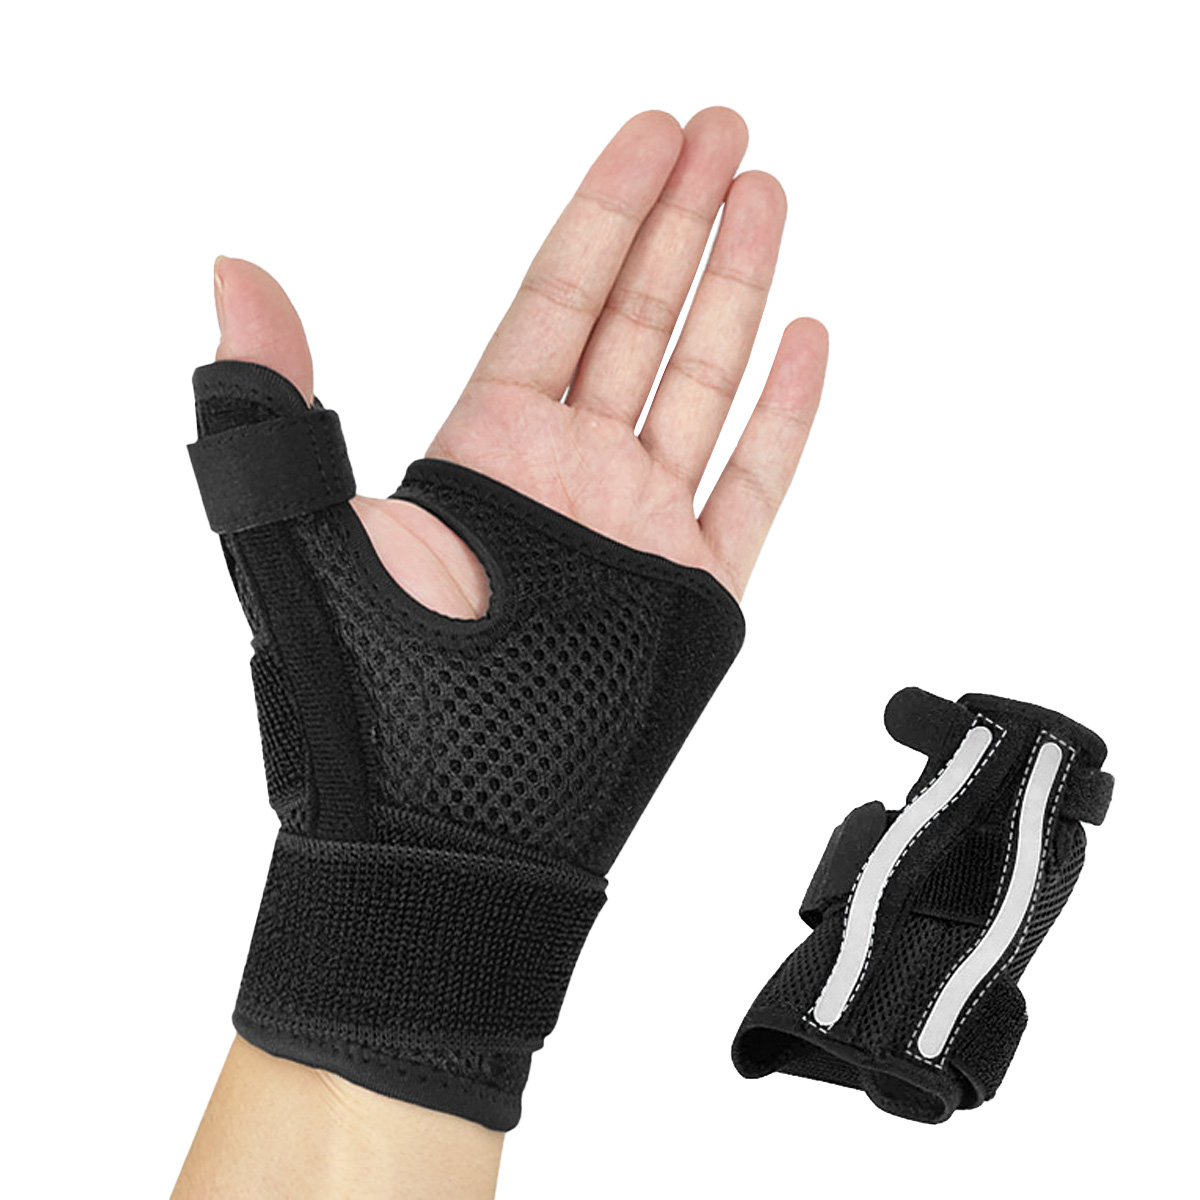 Adjustable Neoprene Palm Wrist Support With Thumb